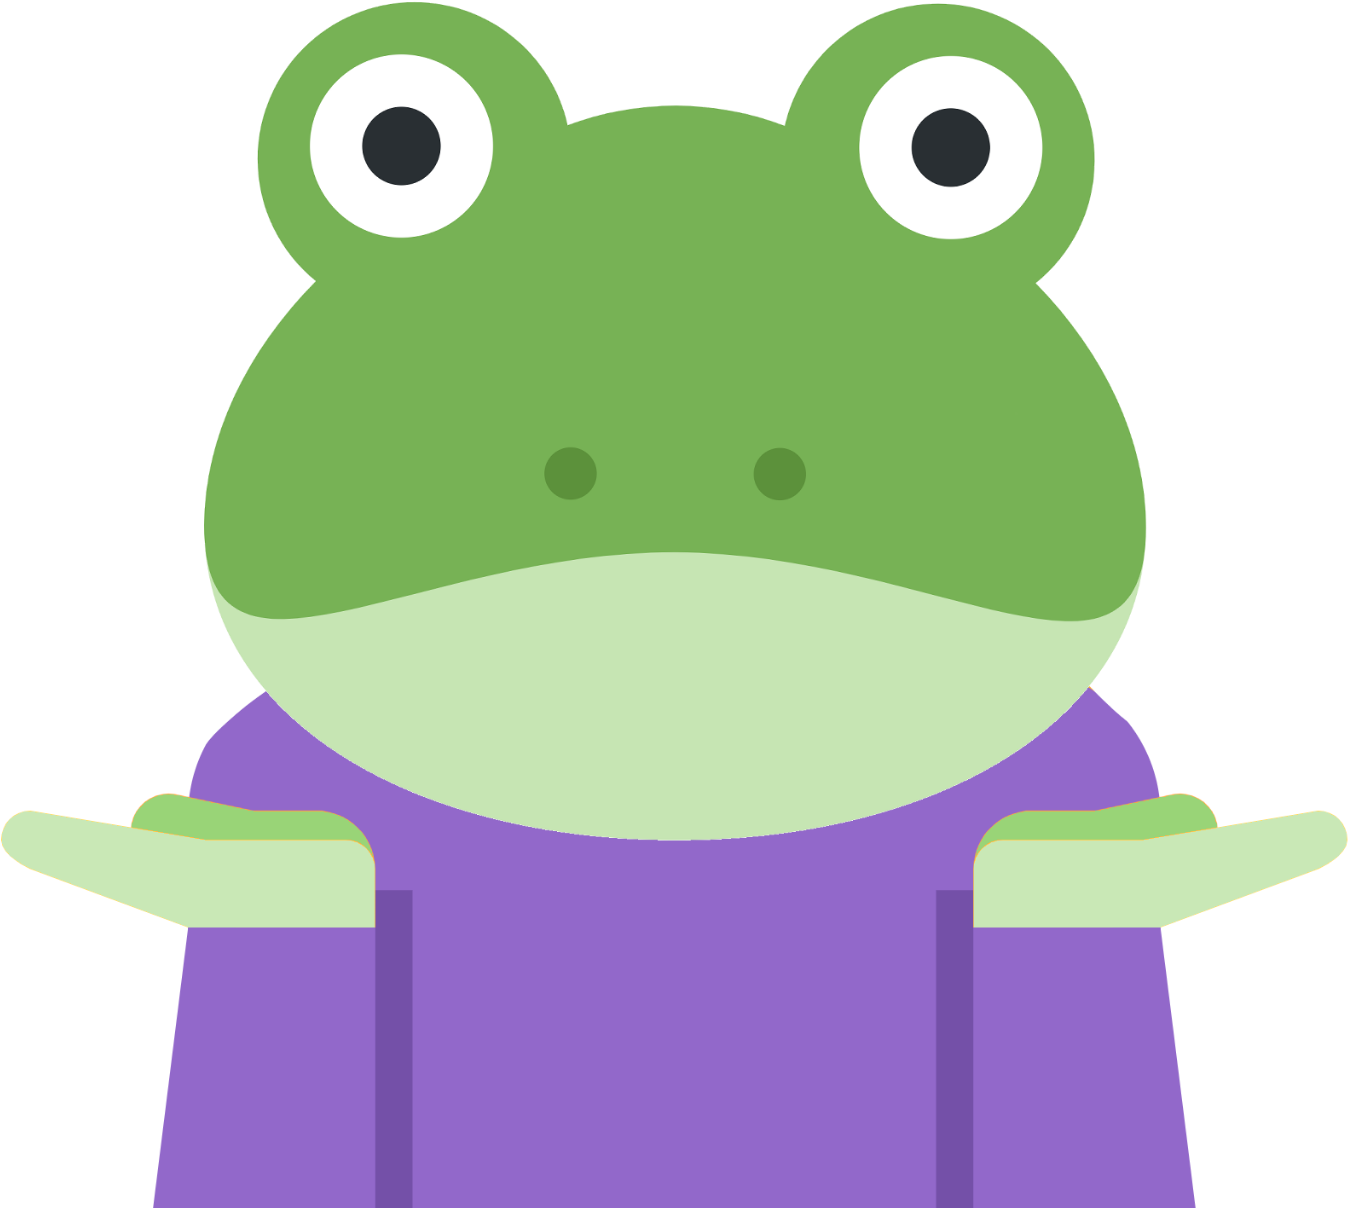 A Cartoon Frog With Its Arms Out